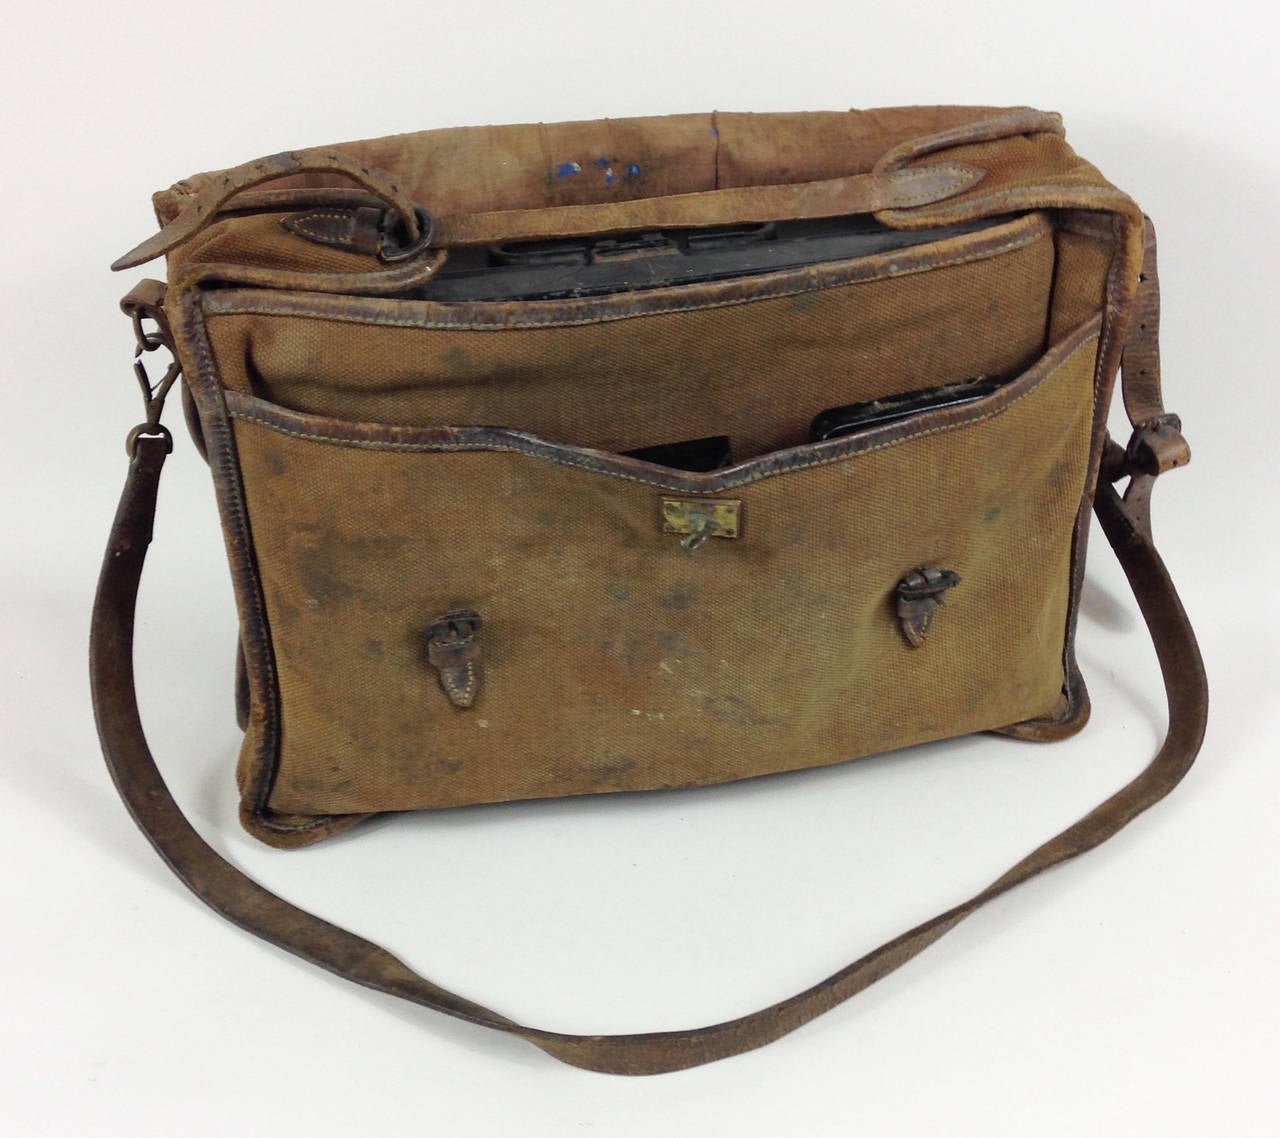 Reeves and Sons Artist's Satchel with Original Tins For Sale 2